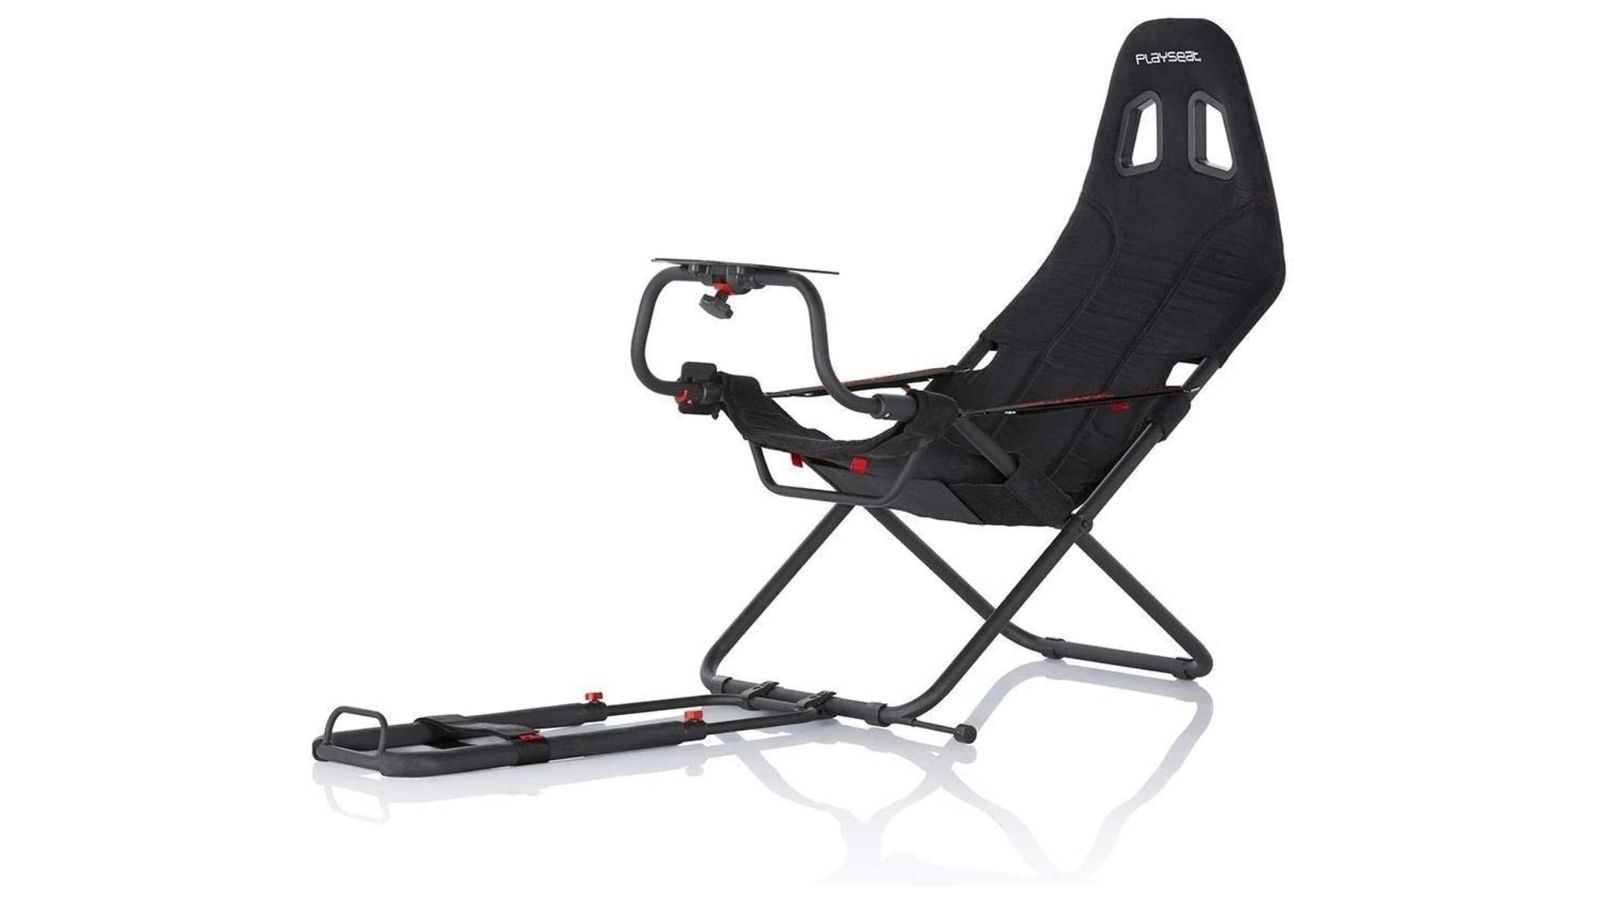 Playseat Challenge Actifit product image of a black foldable racing seat and cockpit.